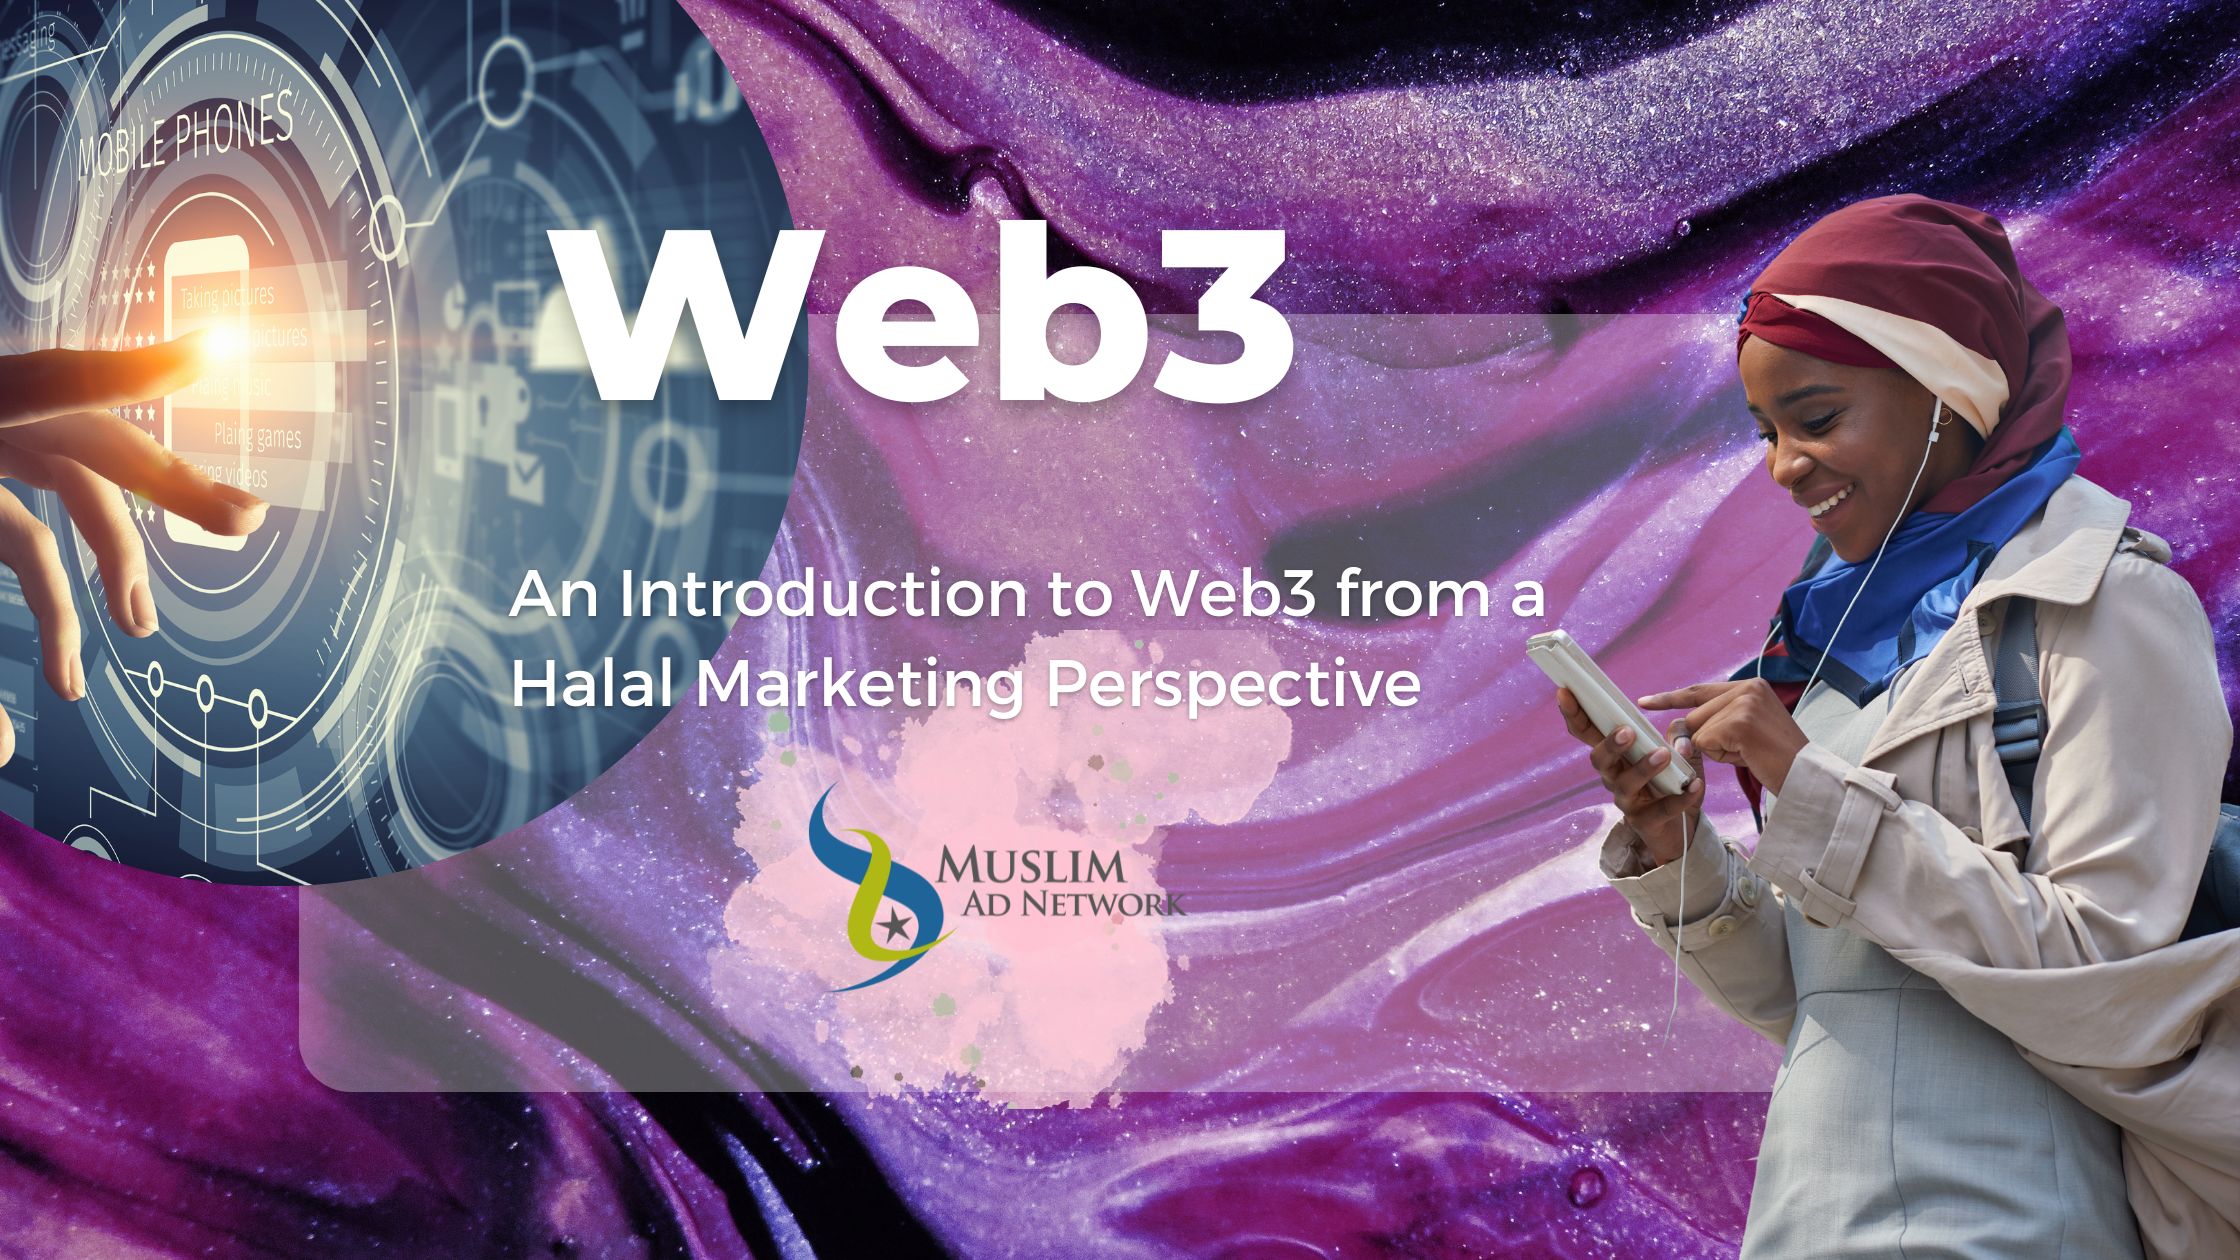 How to Effectively Market to Muslims in Web3